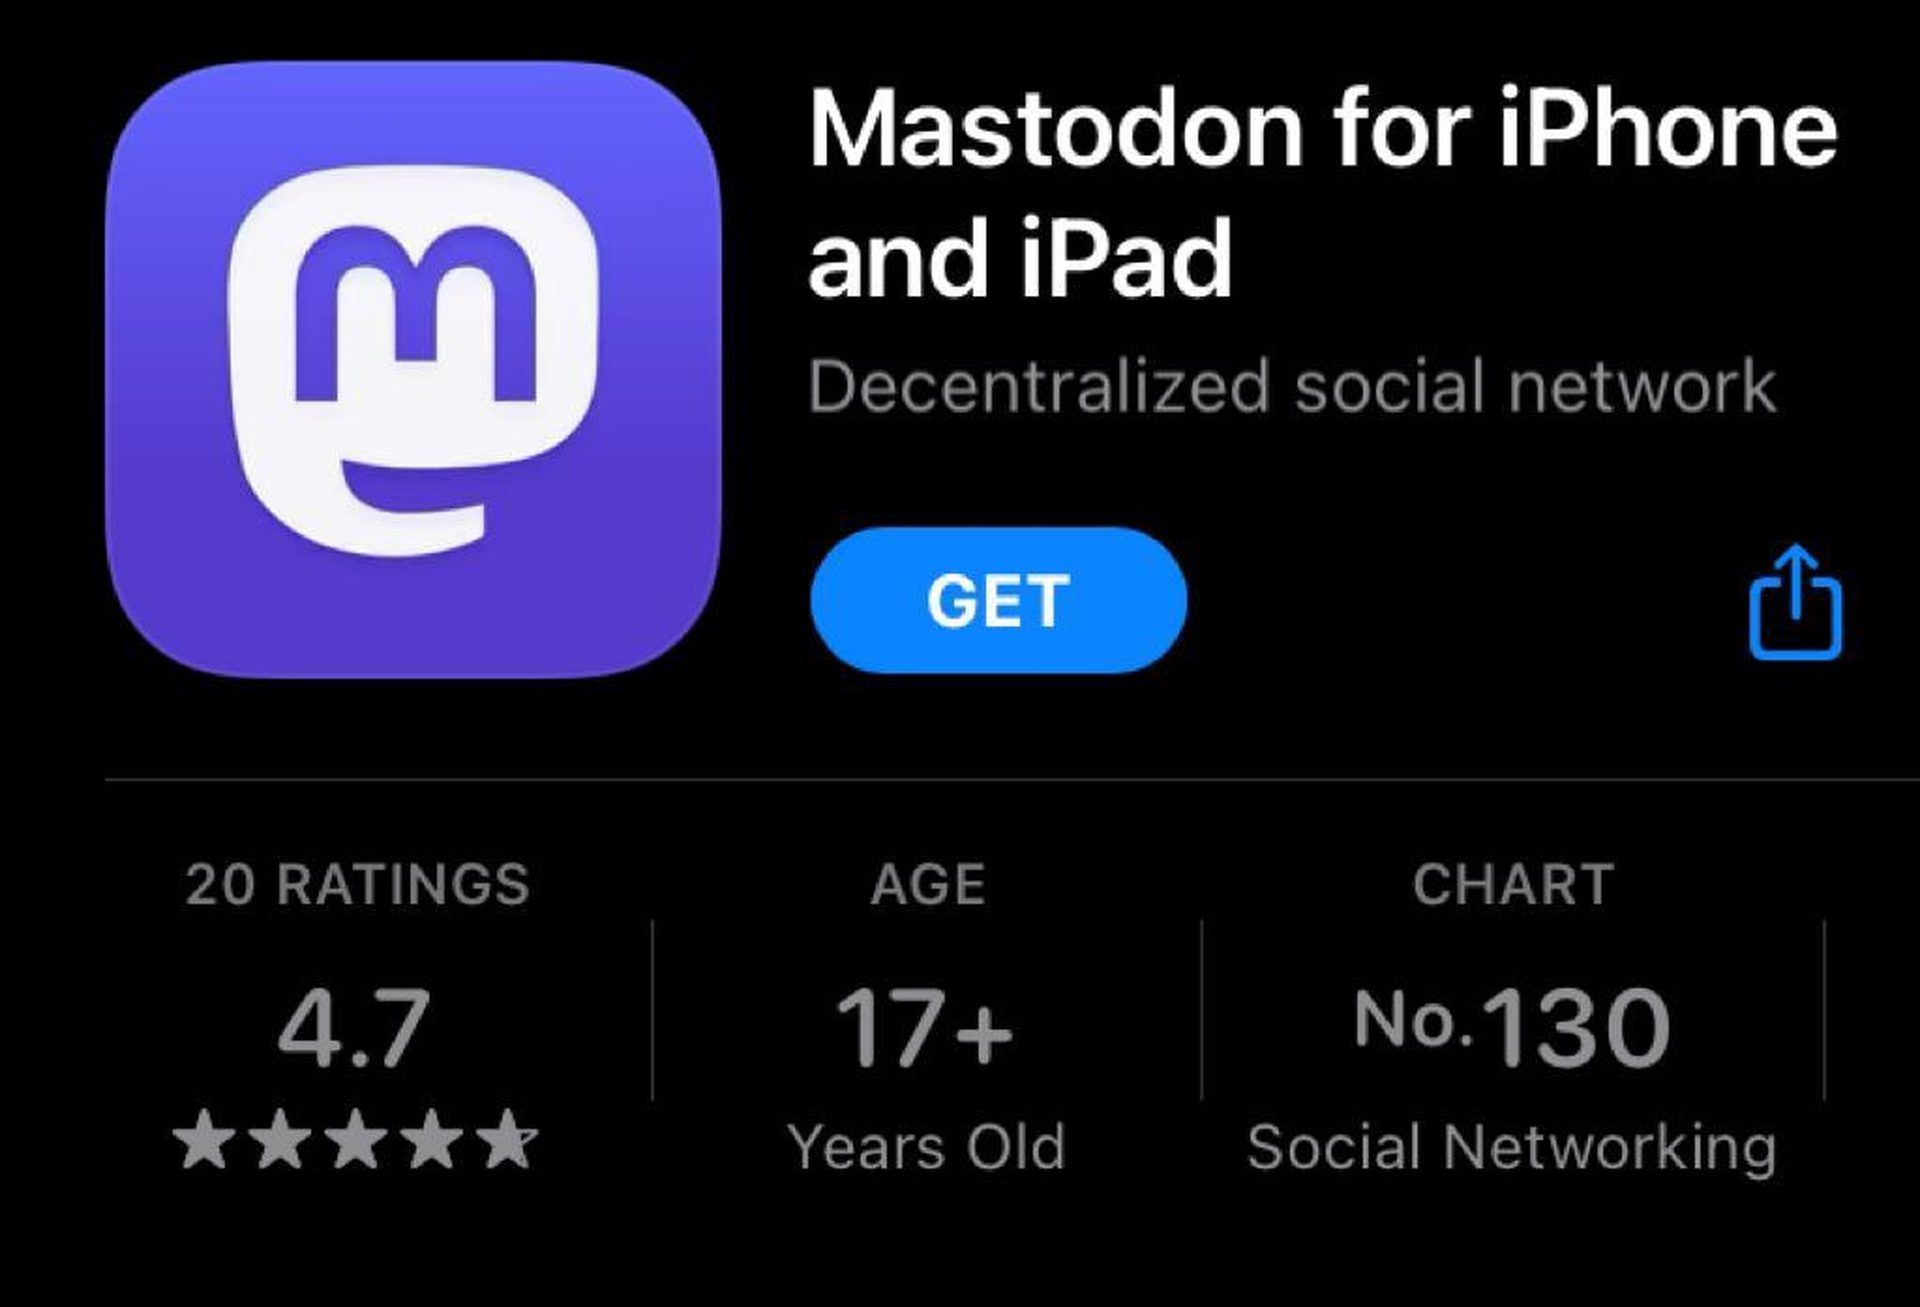 Mastodon Vs Twitter: Everything You Need To Know